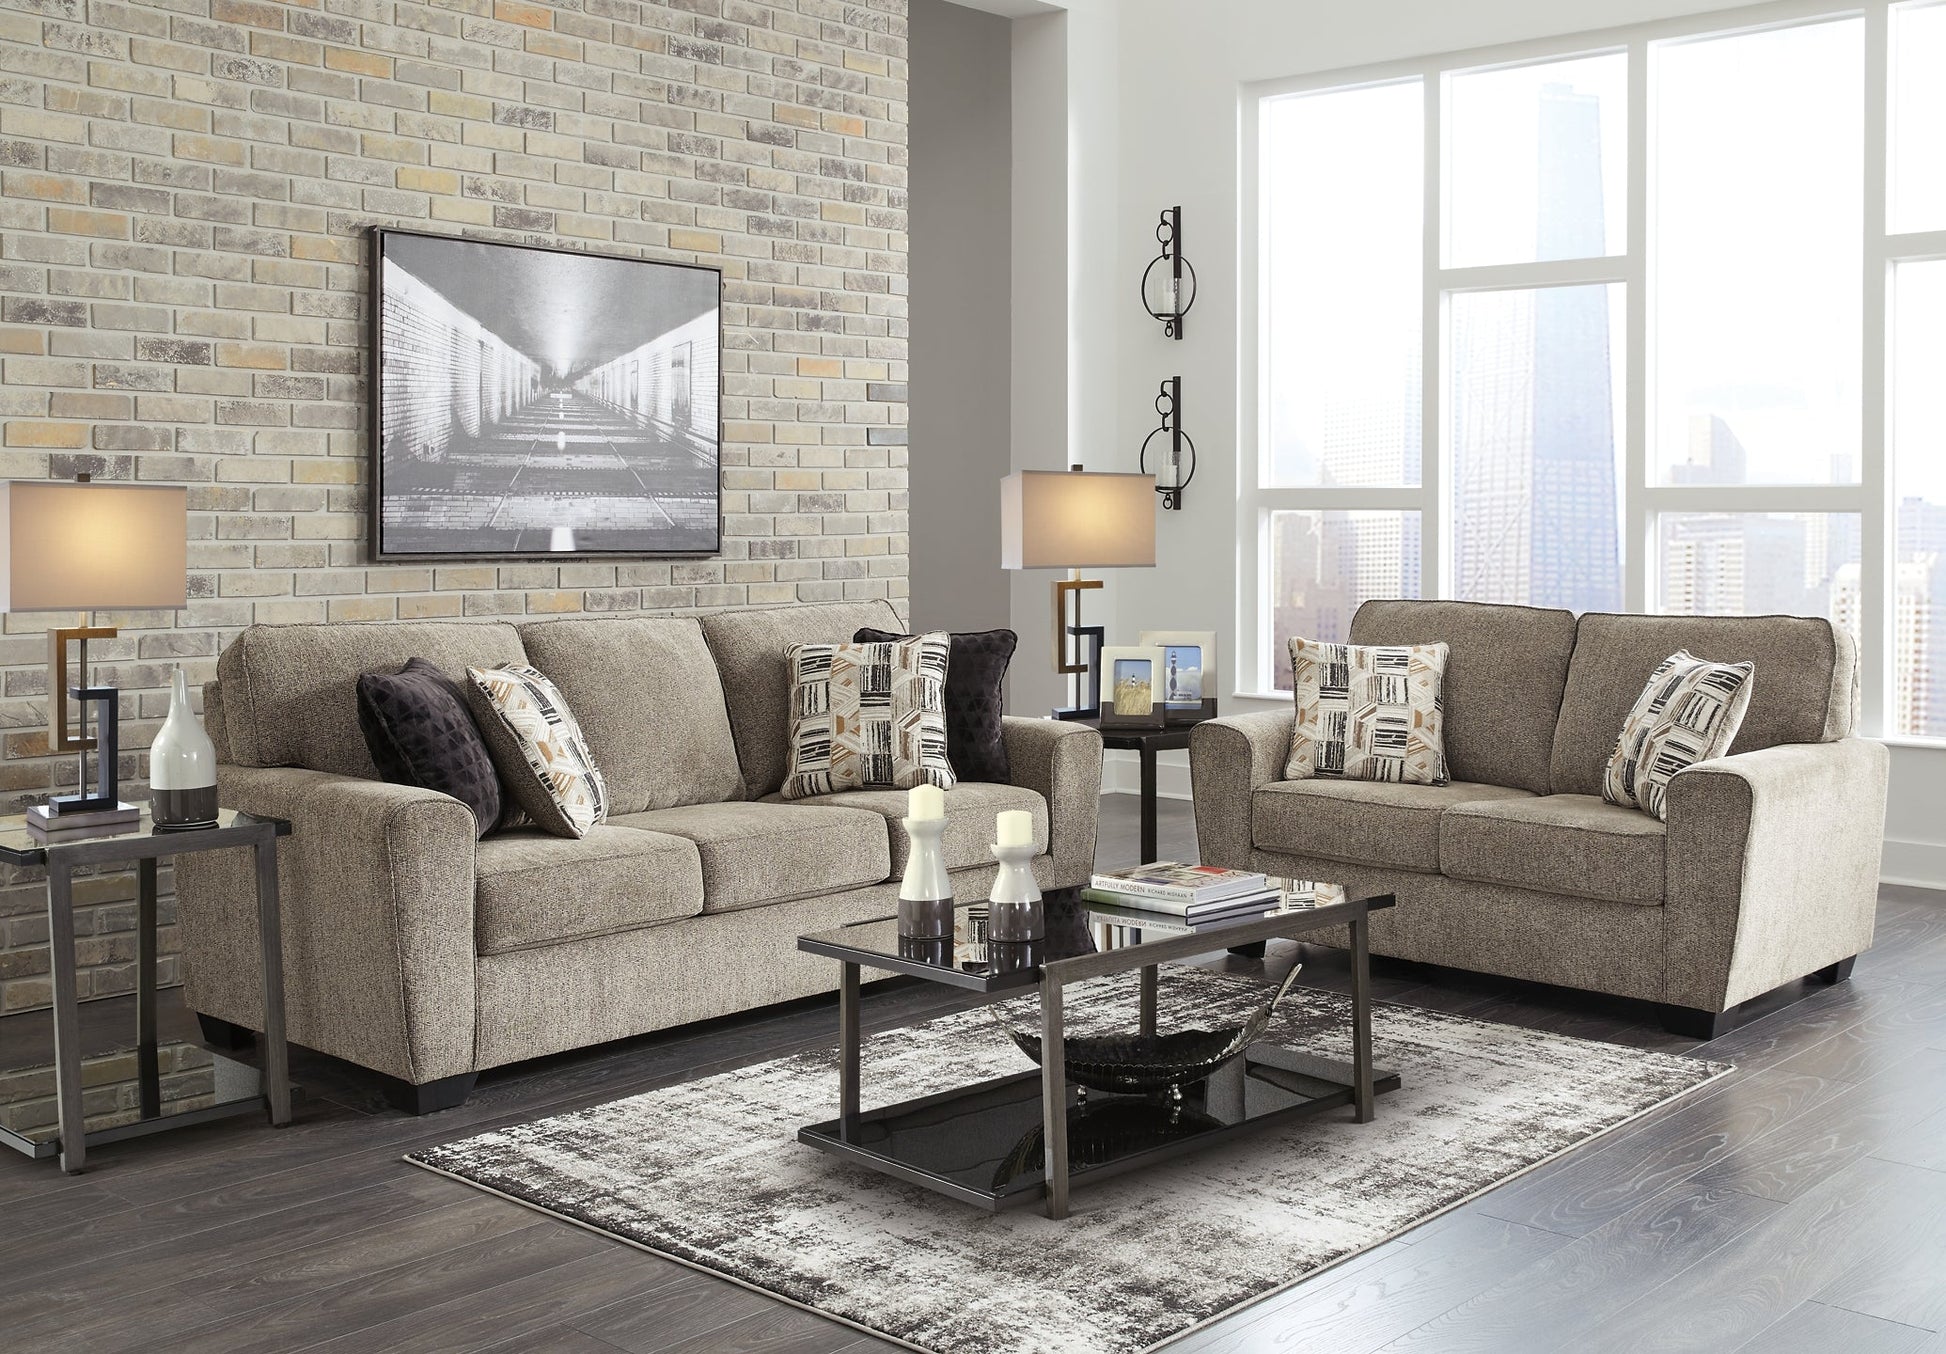 McCluer Sofa and Loveseat Rent Wise Rent To Own Jacksonville, Florida